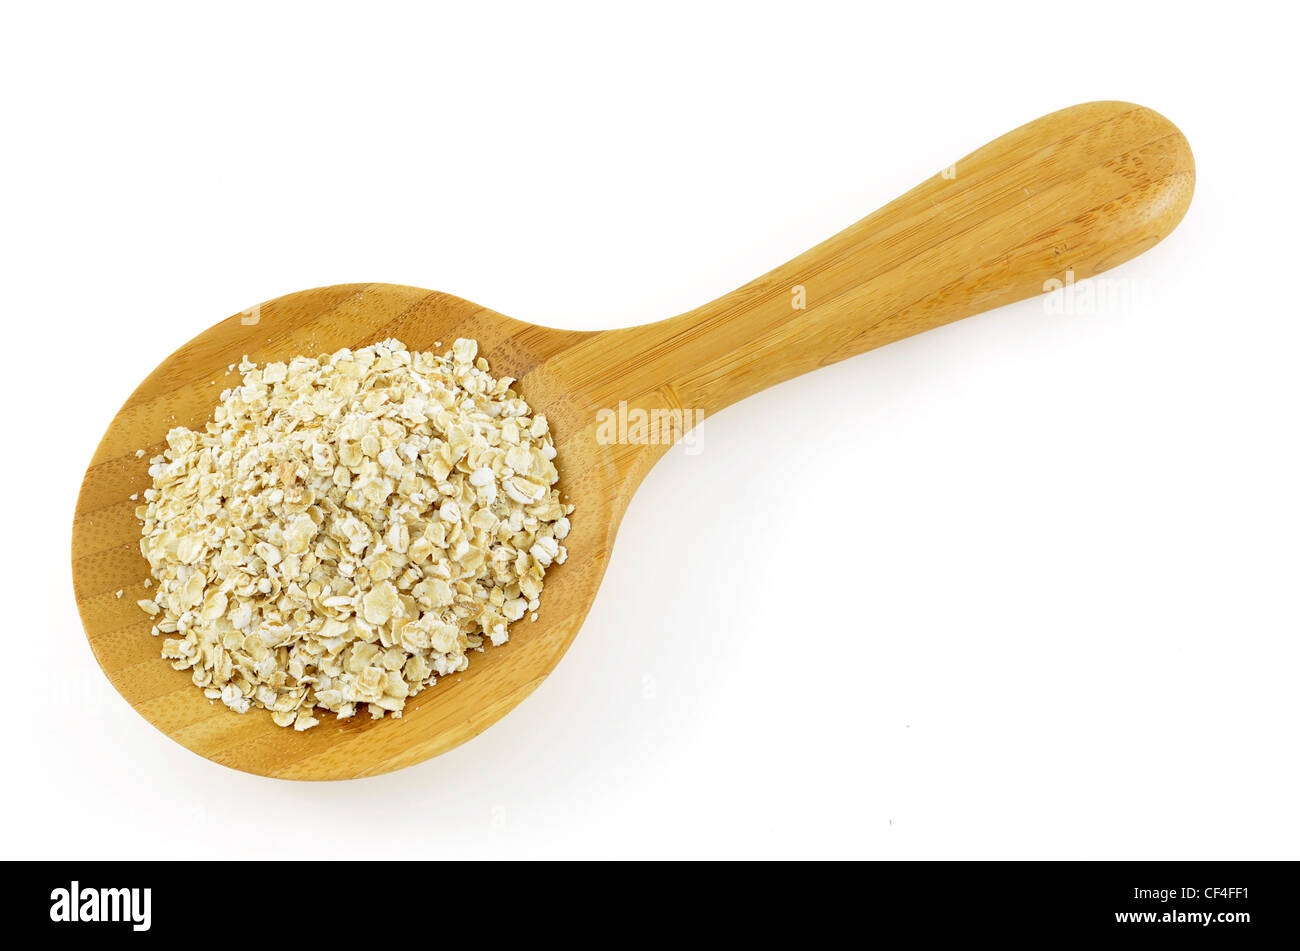 Crushed oats in wooden spoon on white background Stock Photo